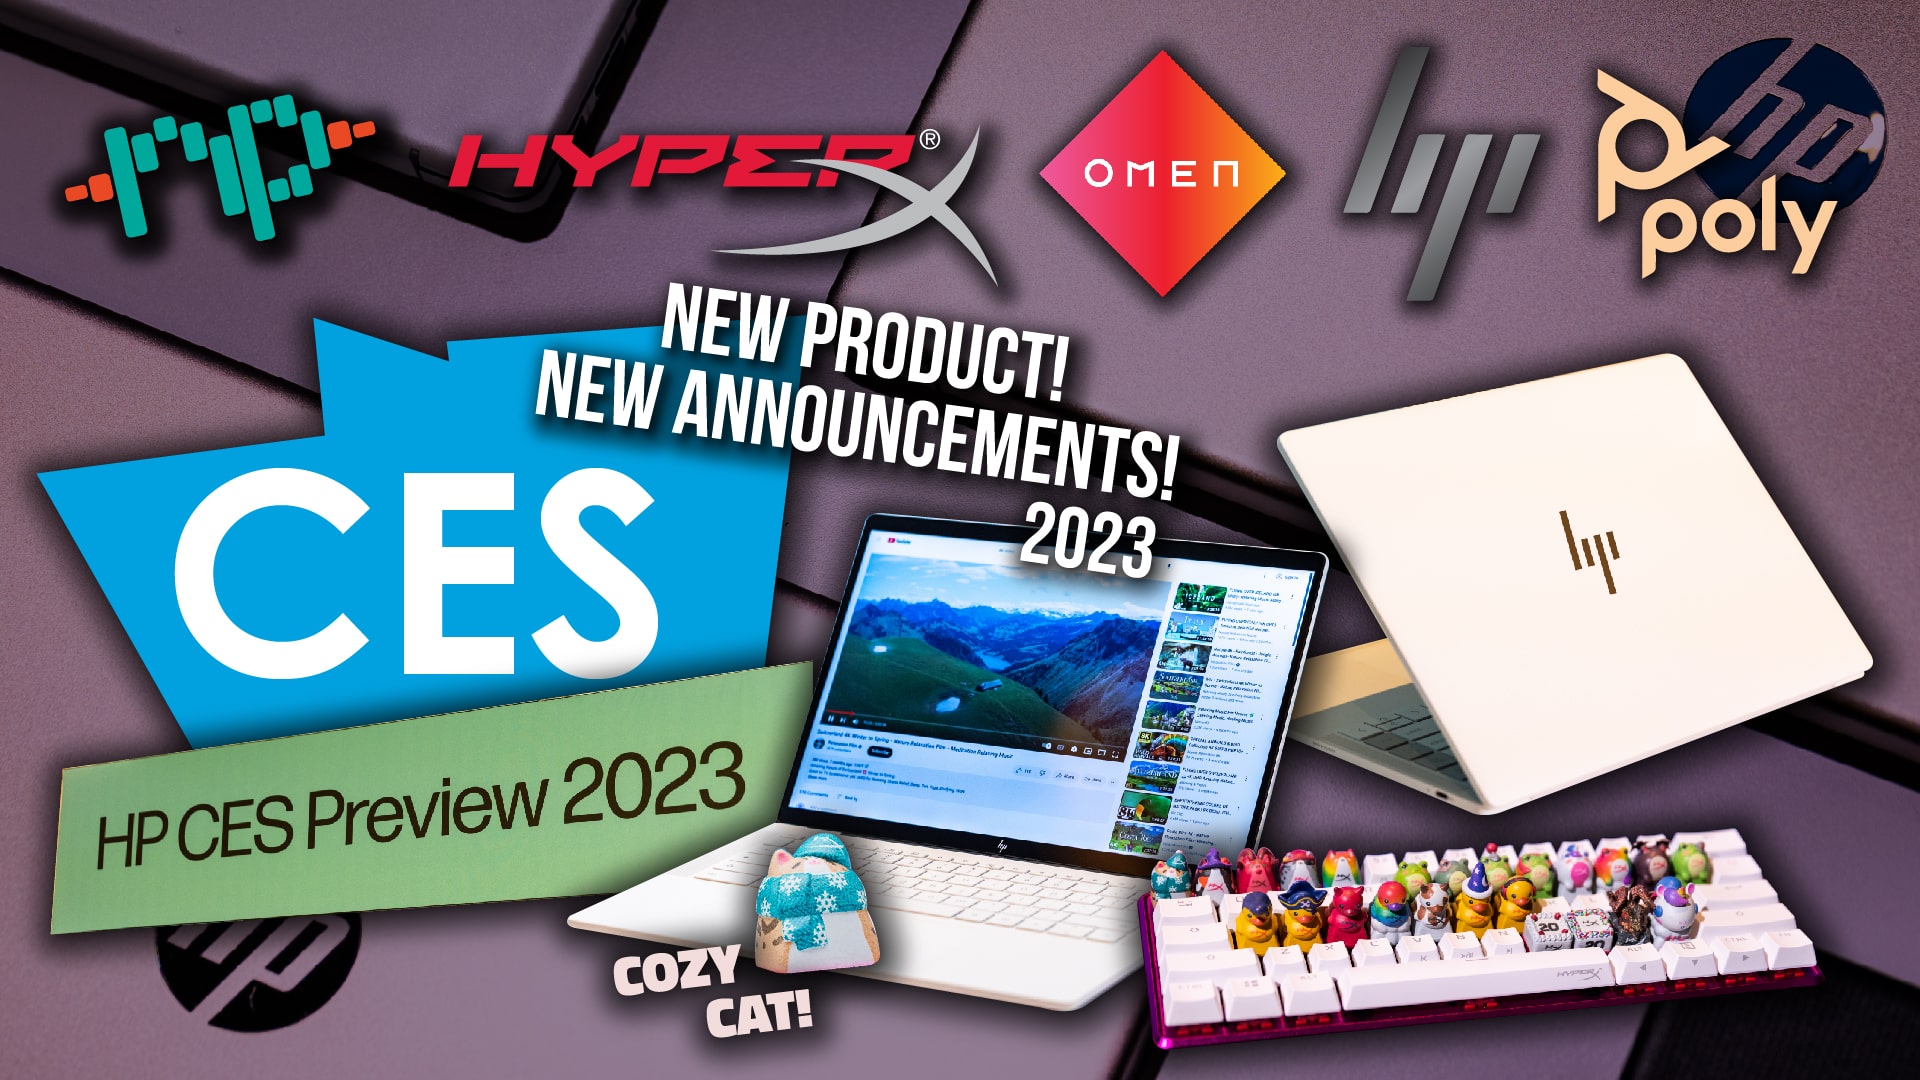 CES 2023 Preview Event for HP, Omen, HyperX, & Poly – Quick Insight of What’s Arriving